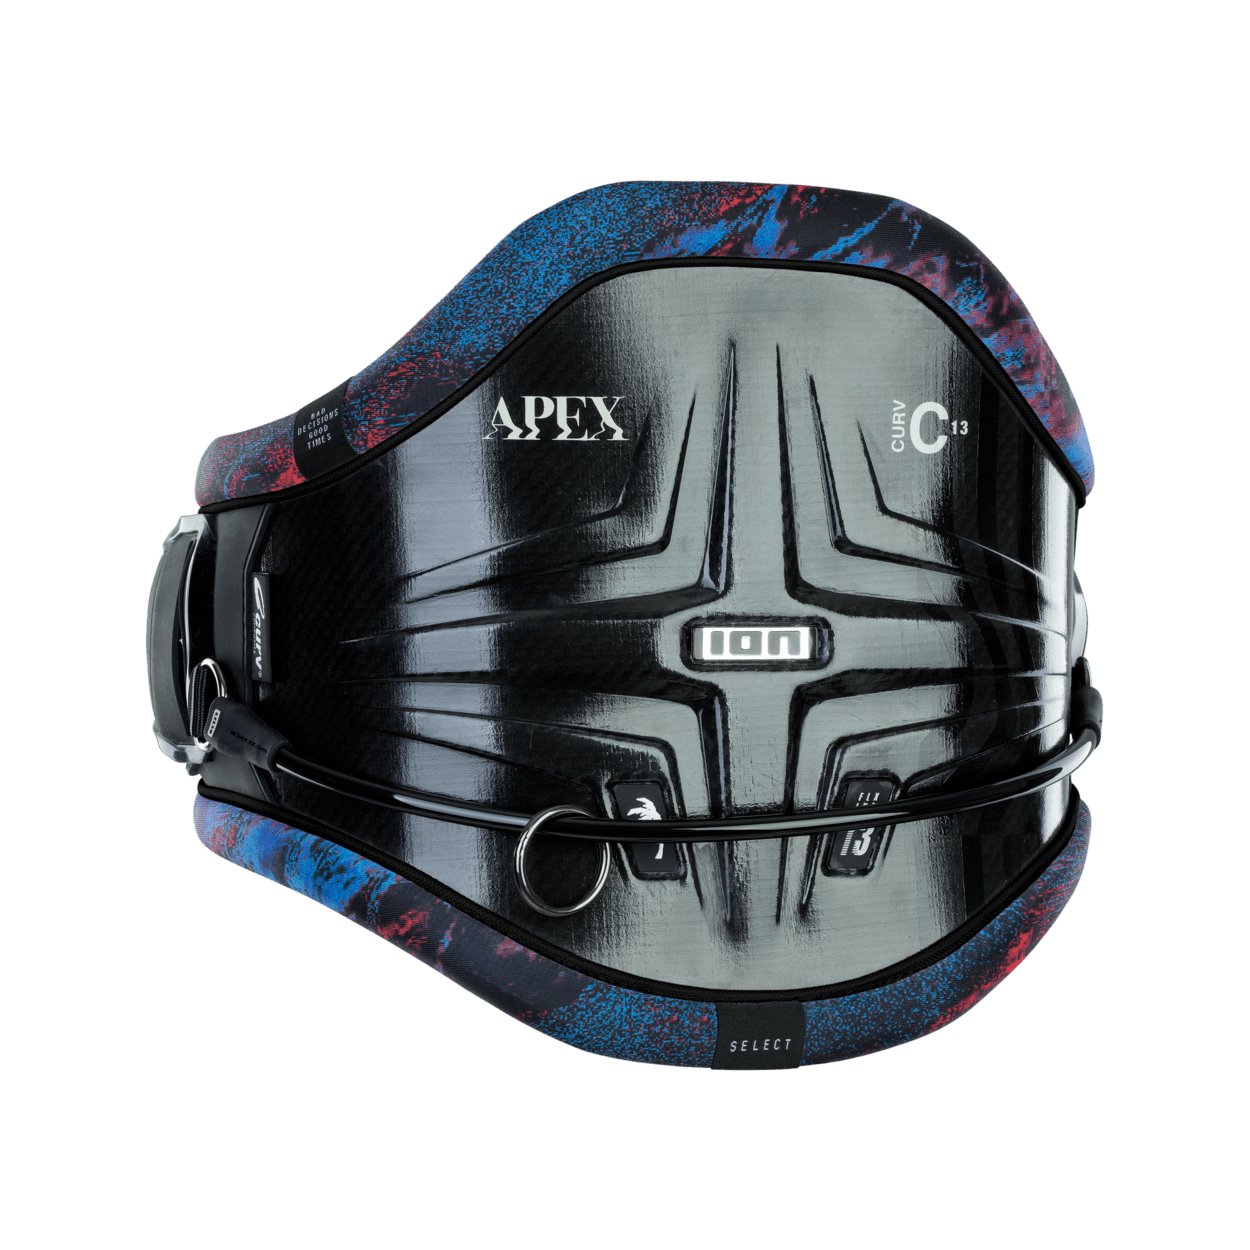 ION Apex Curv 13 Select 2021 - Worthing Watersports - 9008415943166 - Harness - ION Water